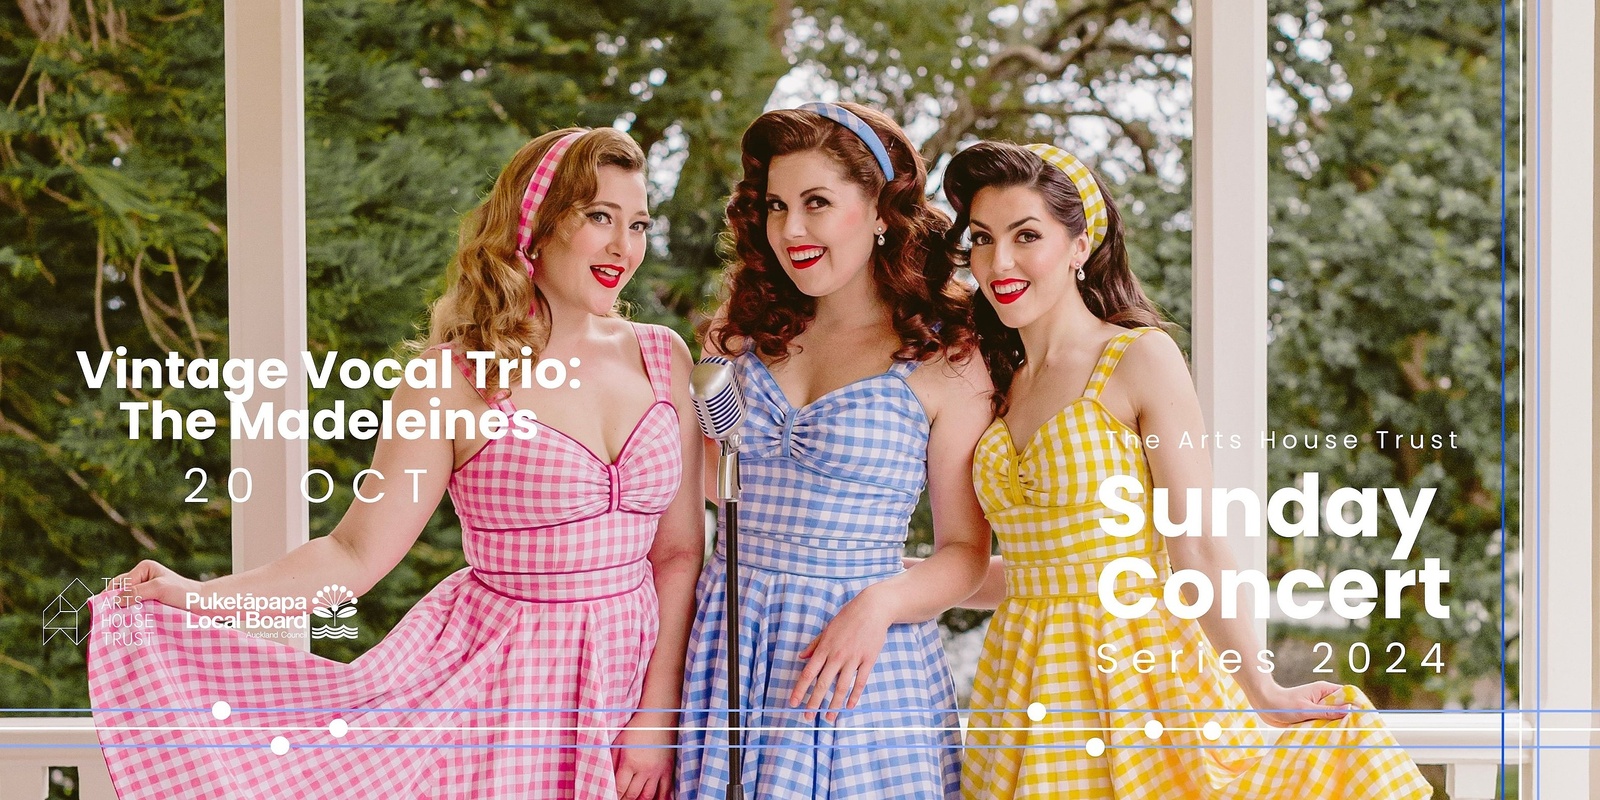 Banner image for Sunday Concert Series: The Madeleine Trio